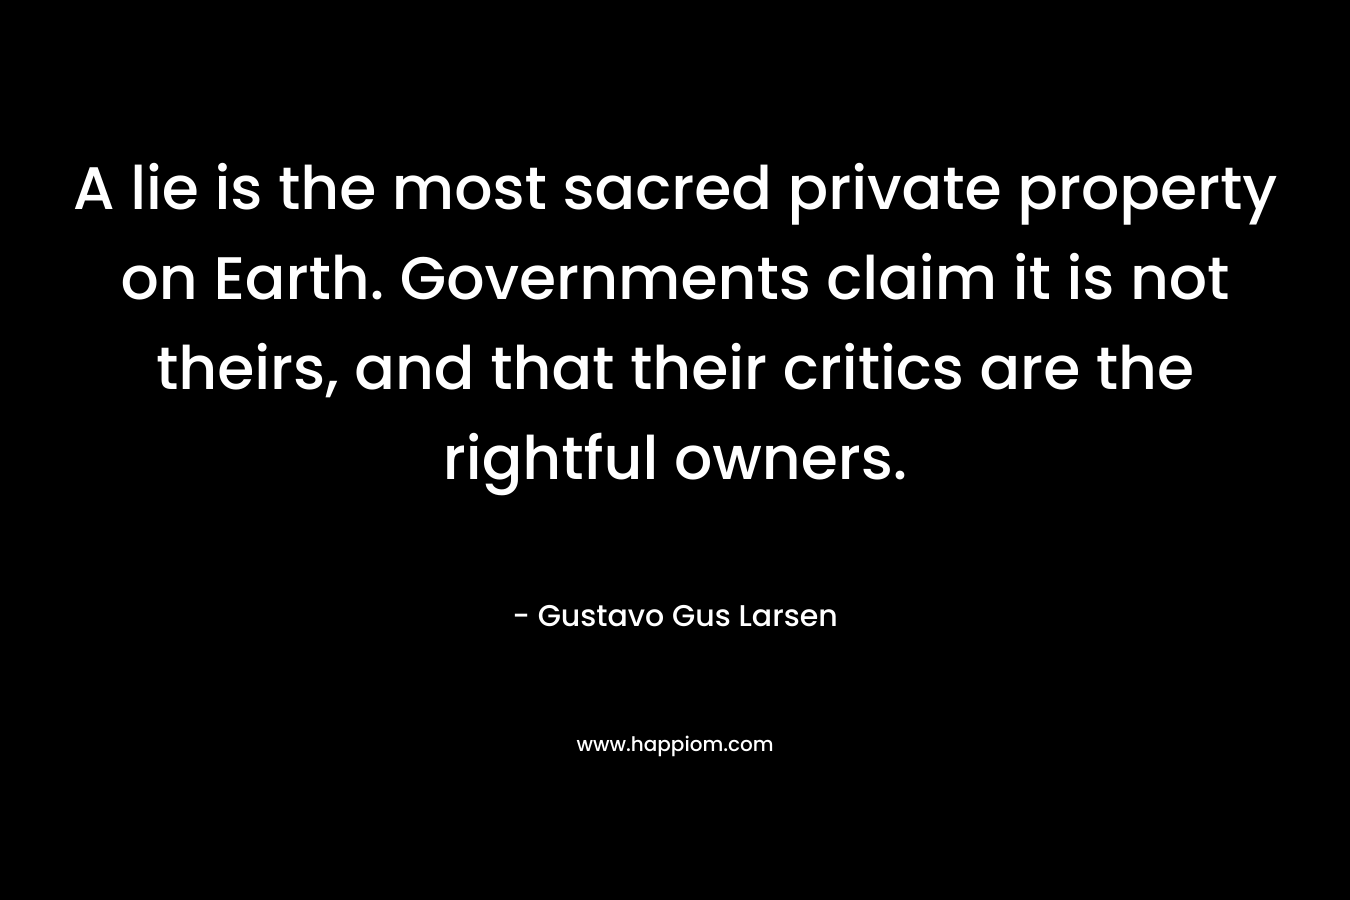 A lie is the most sacred private property on Earth. Governments claim it is not theirs, and that their critics are the rightful owners.